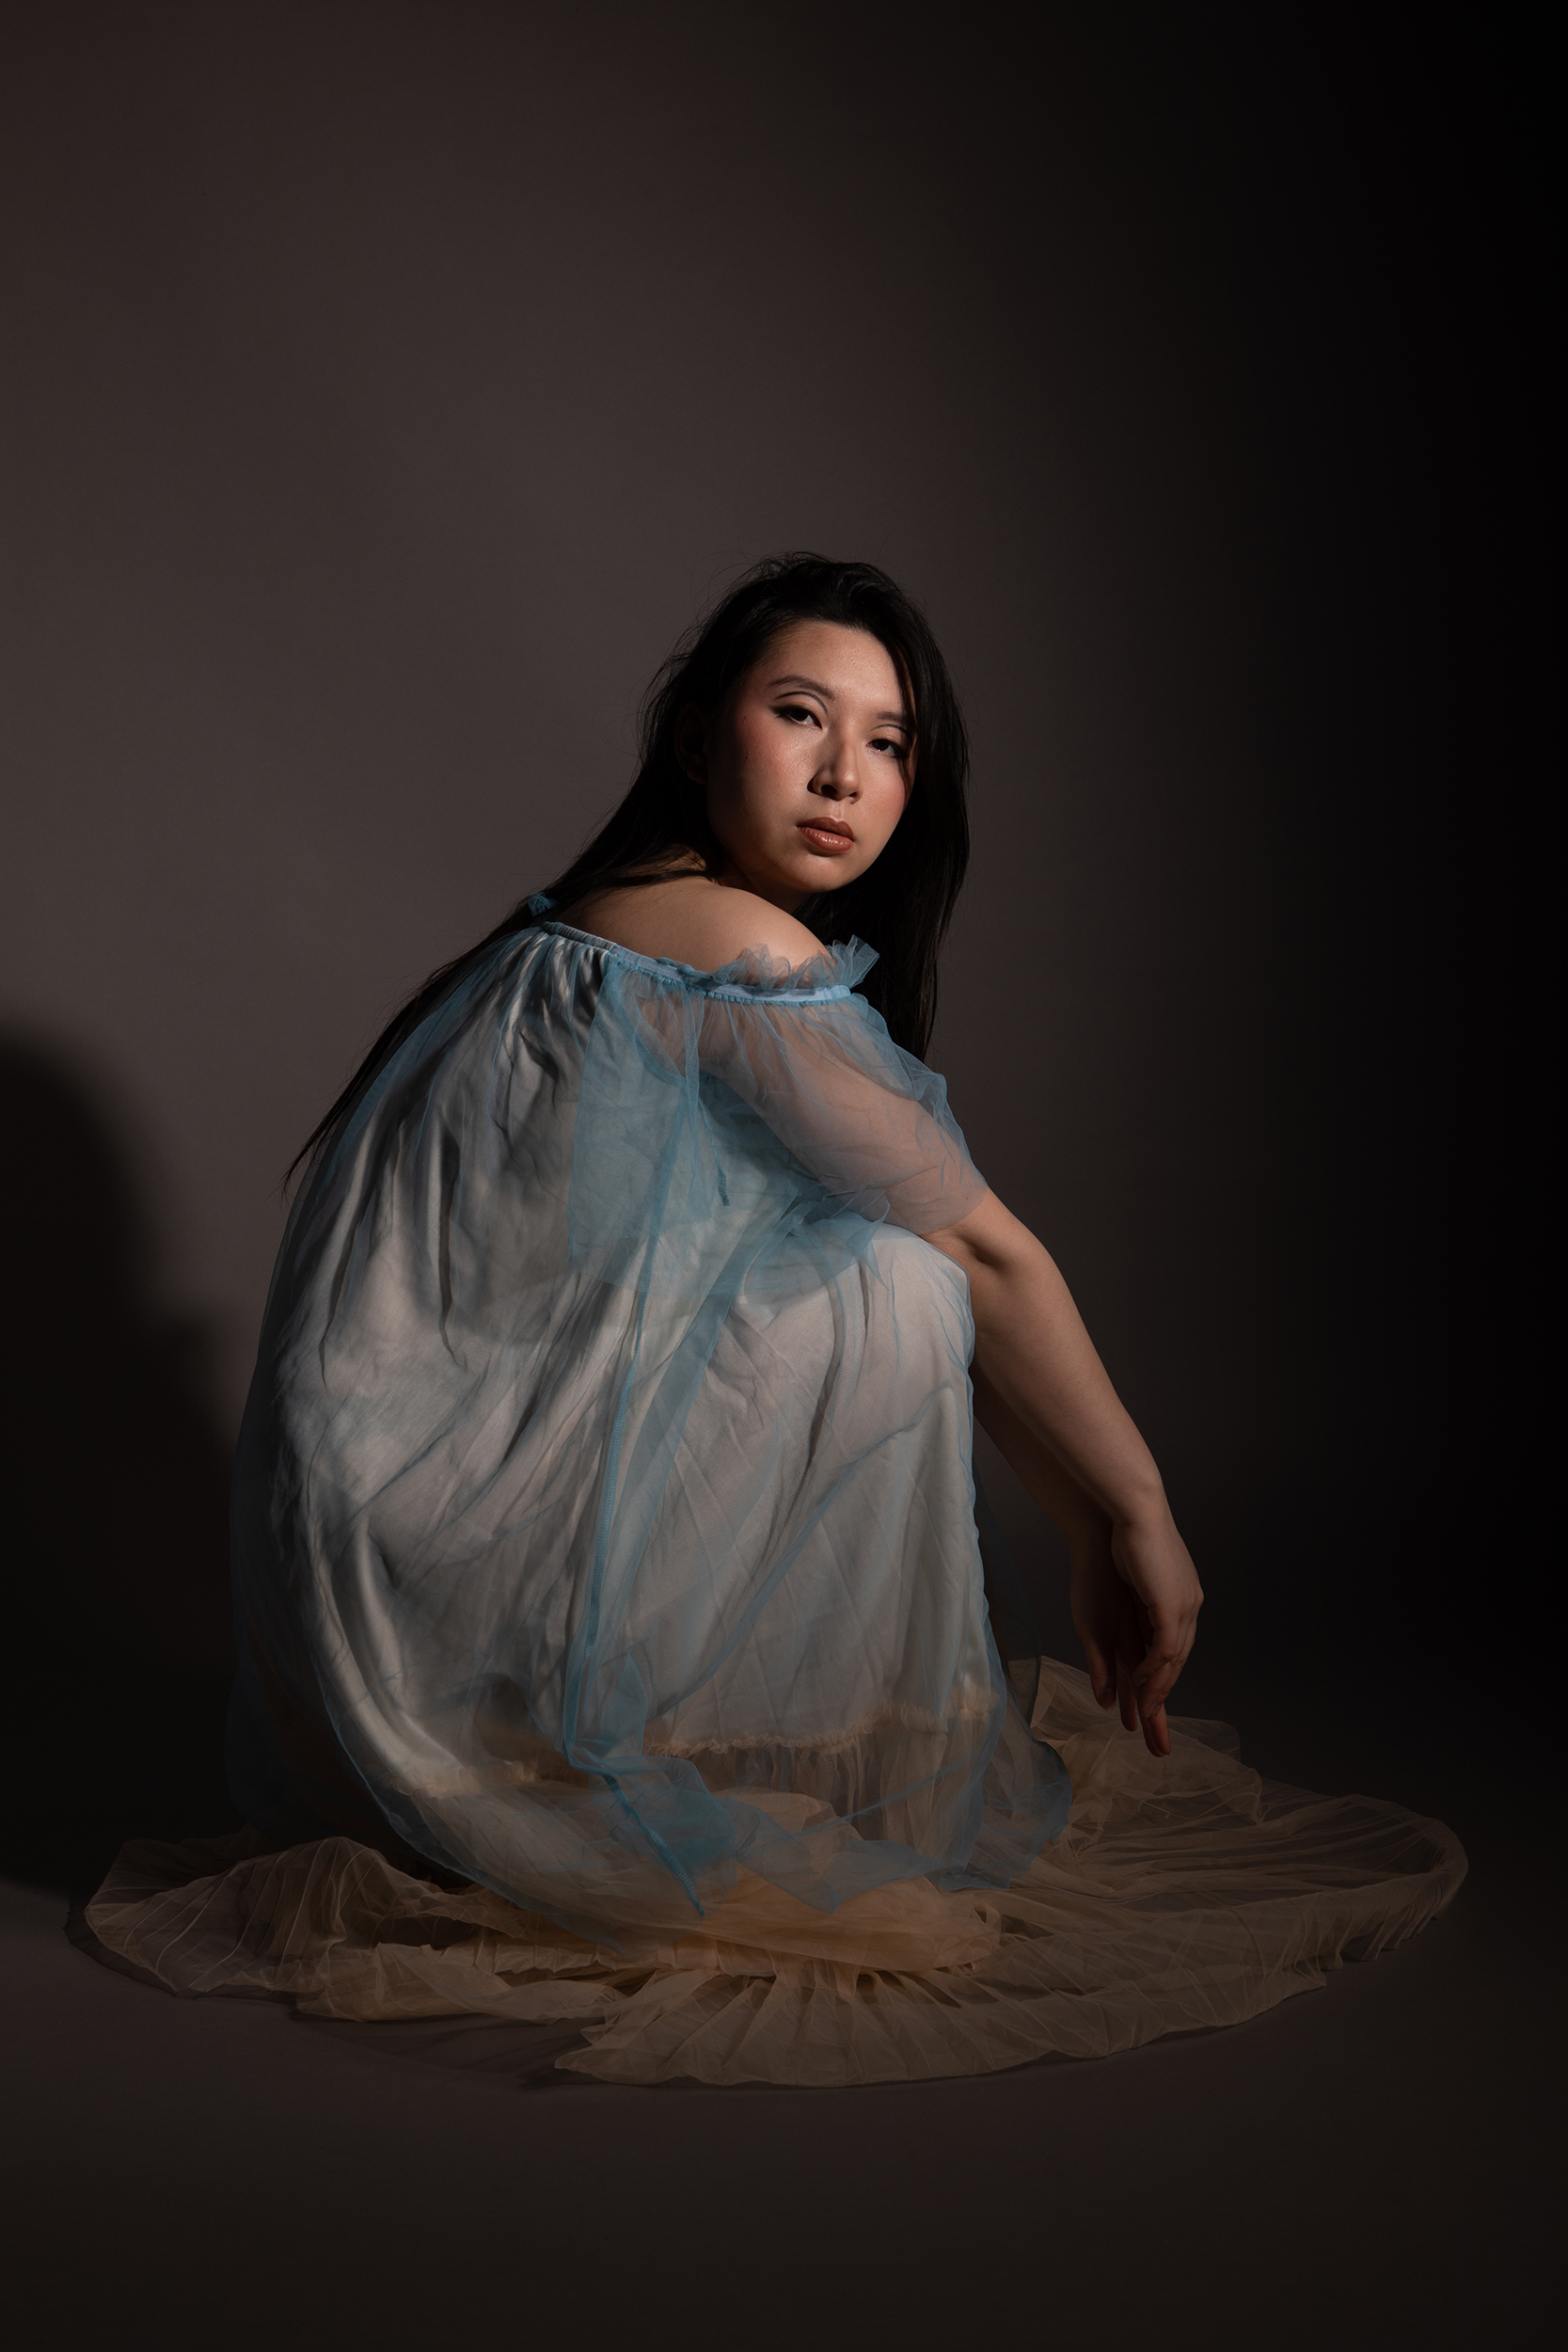 BA Photography work by Beth Unsworth shows an image of an Asian woman crouching in a blue dress.